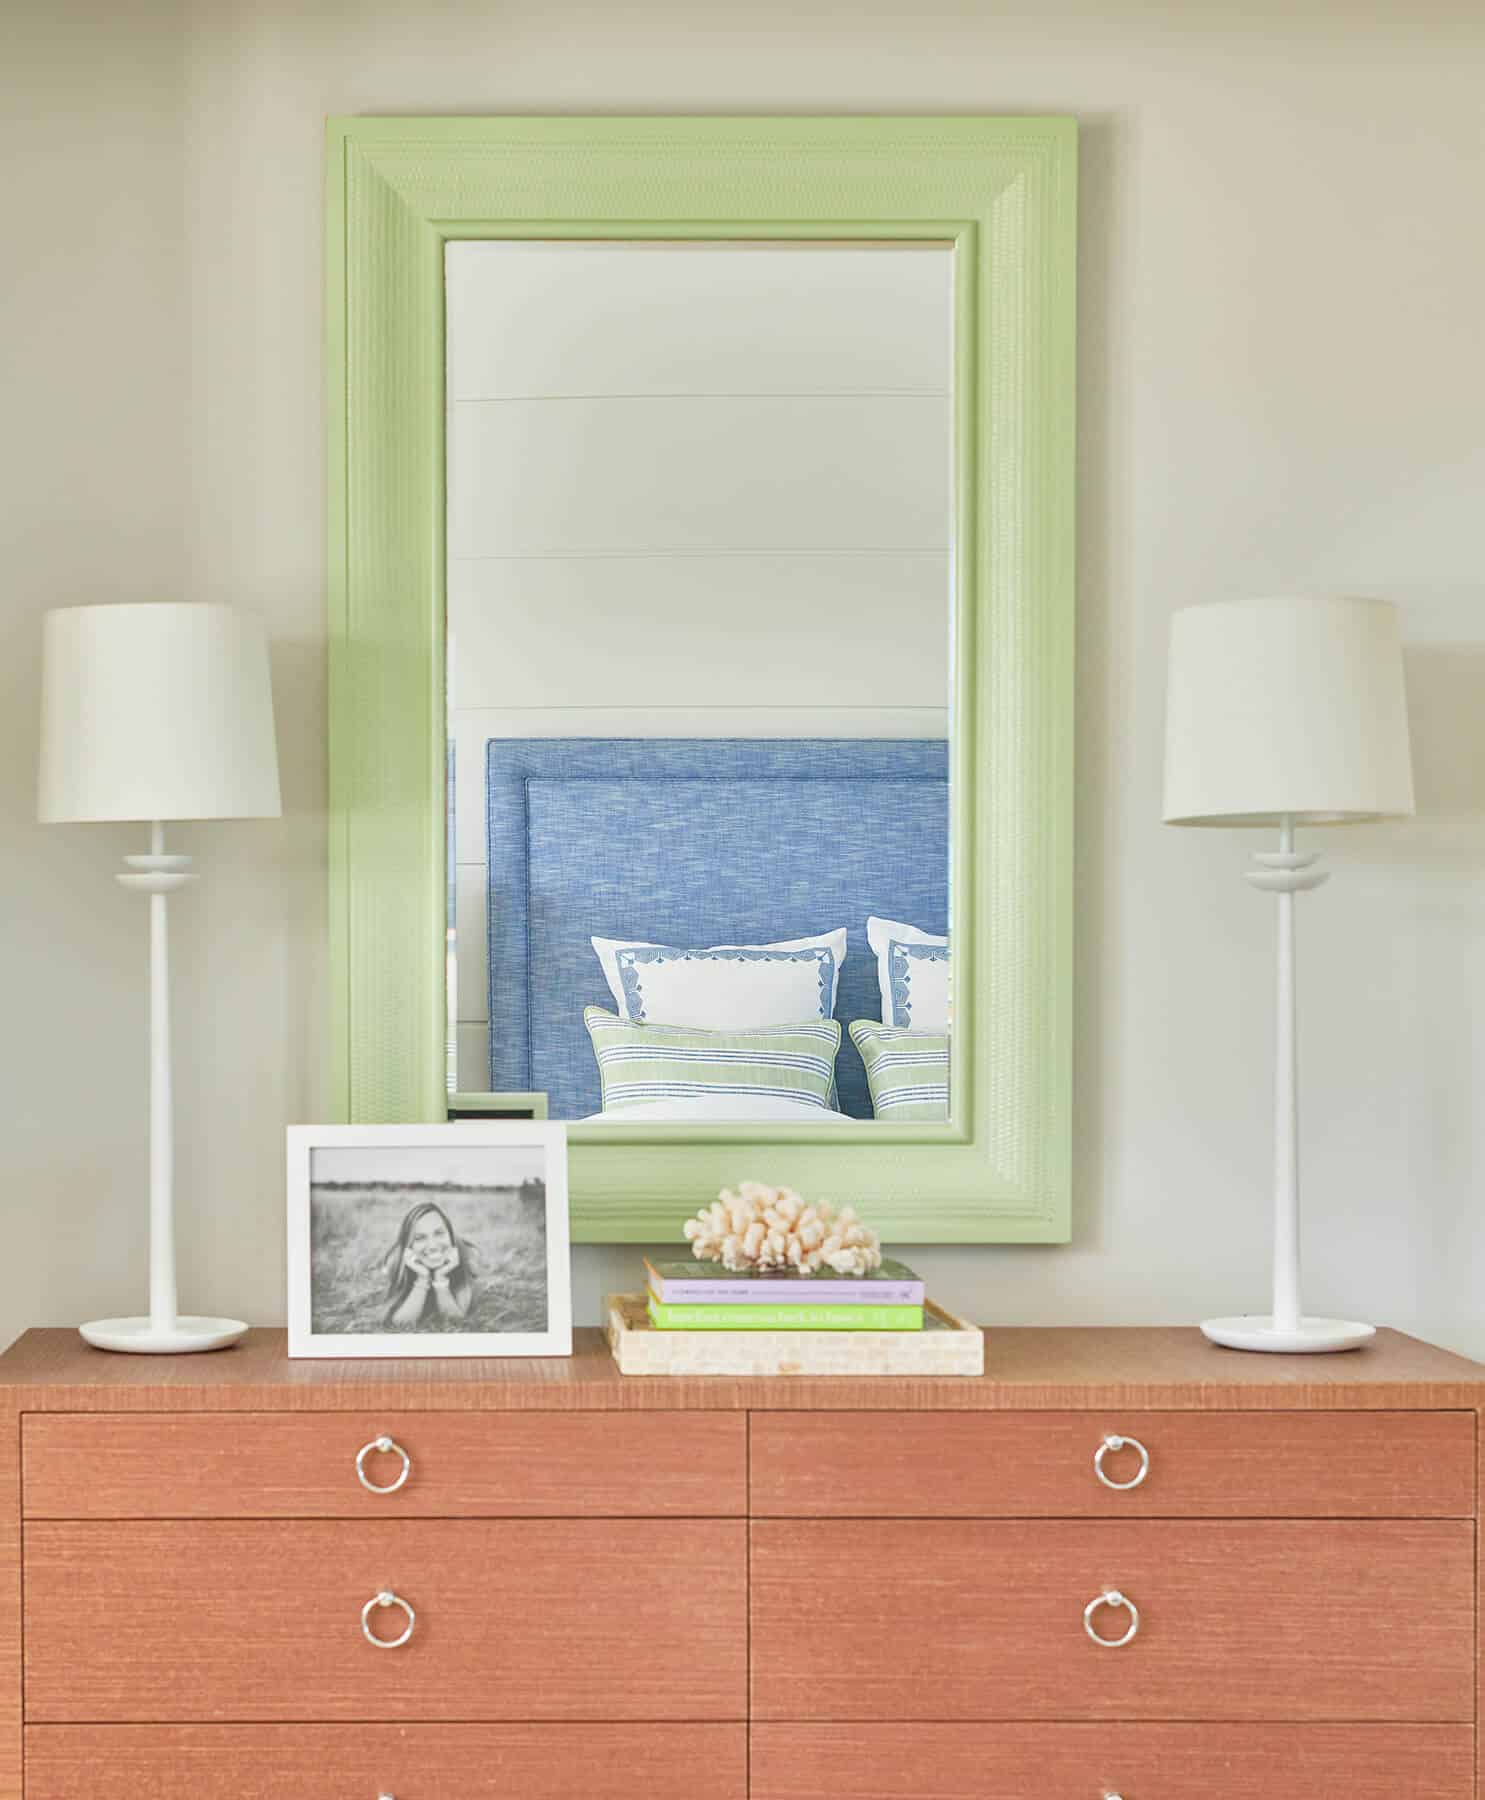 Nantucket, pale blue and green bedroom with dresser and mirror